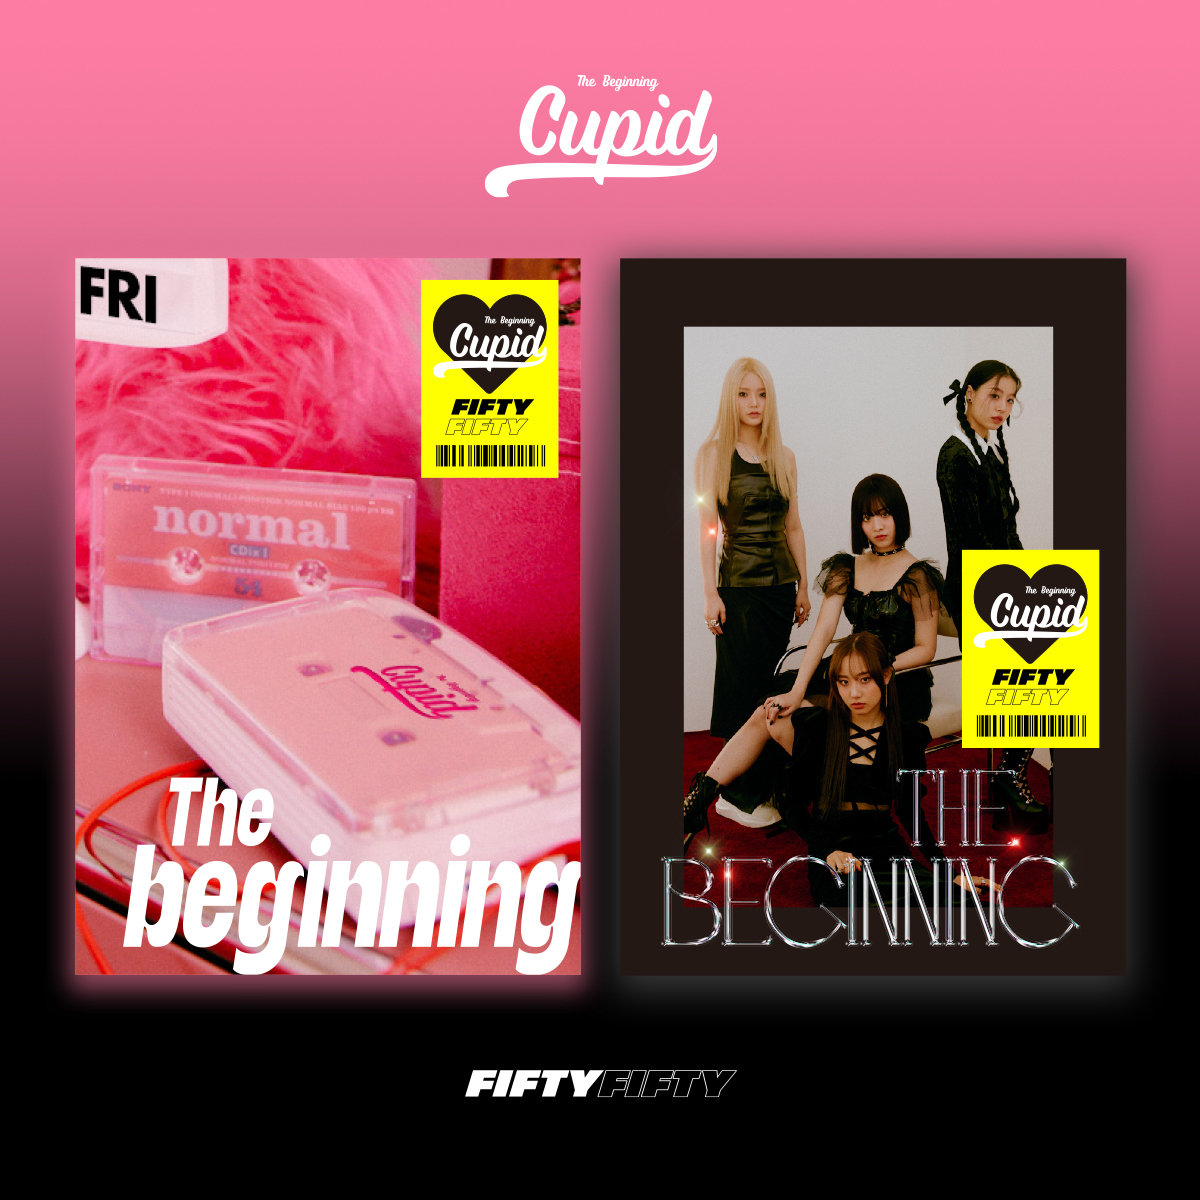 FIFTY FIFTY The 1st Single The Beginning: Cupid